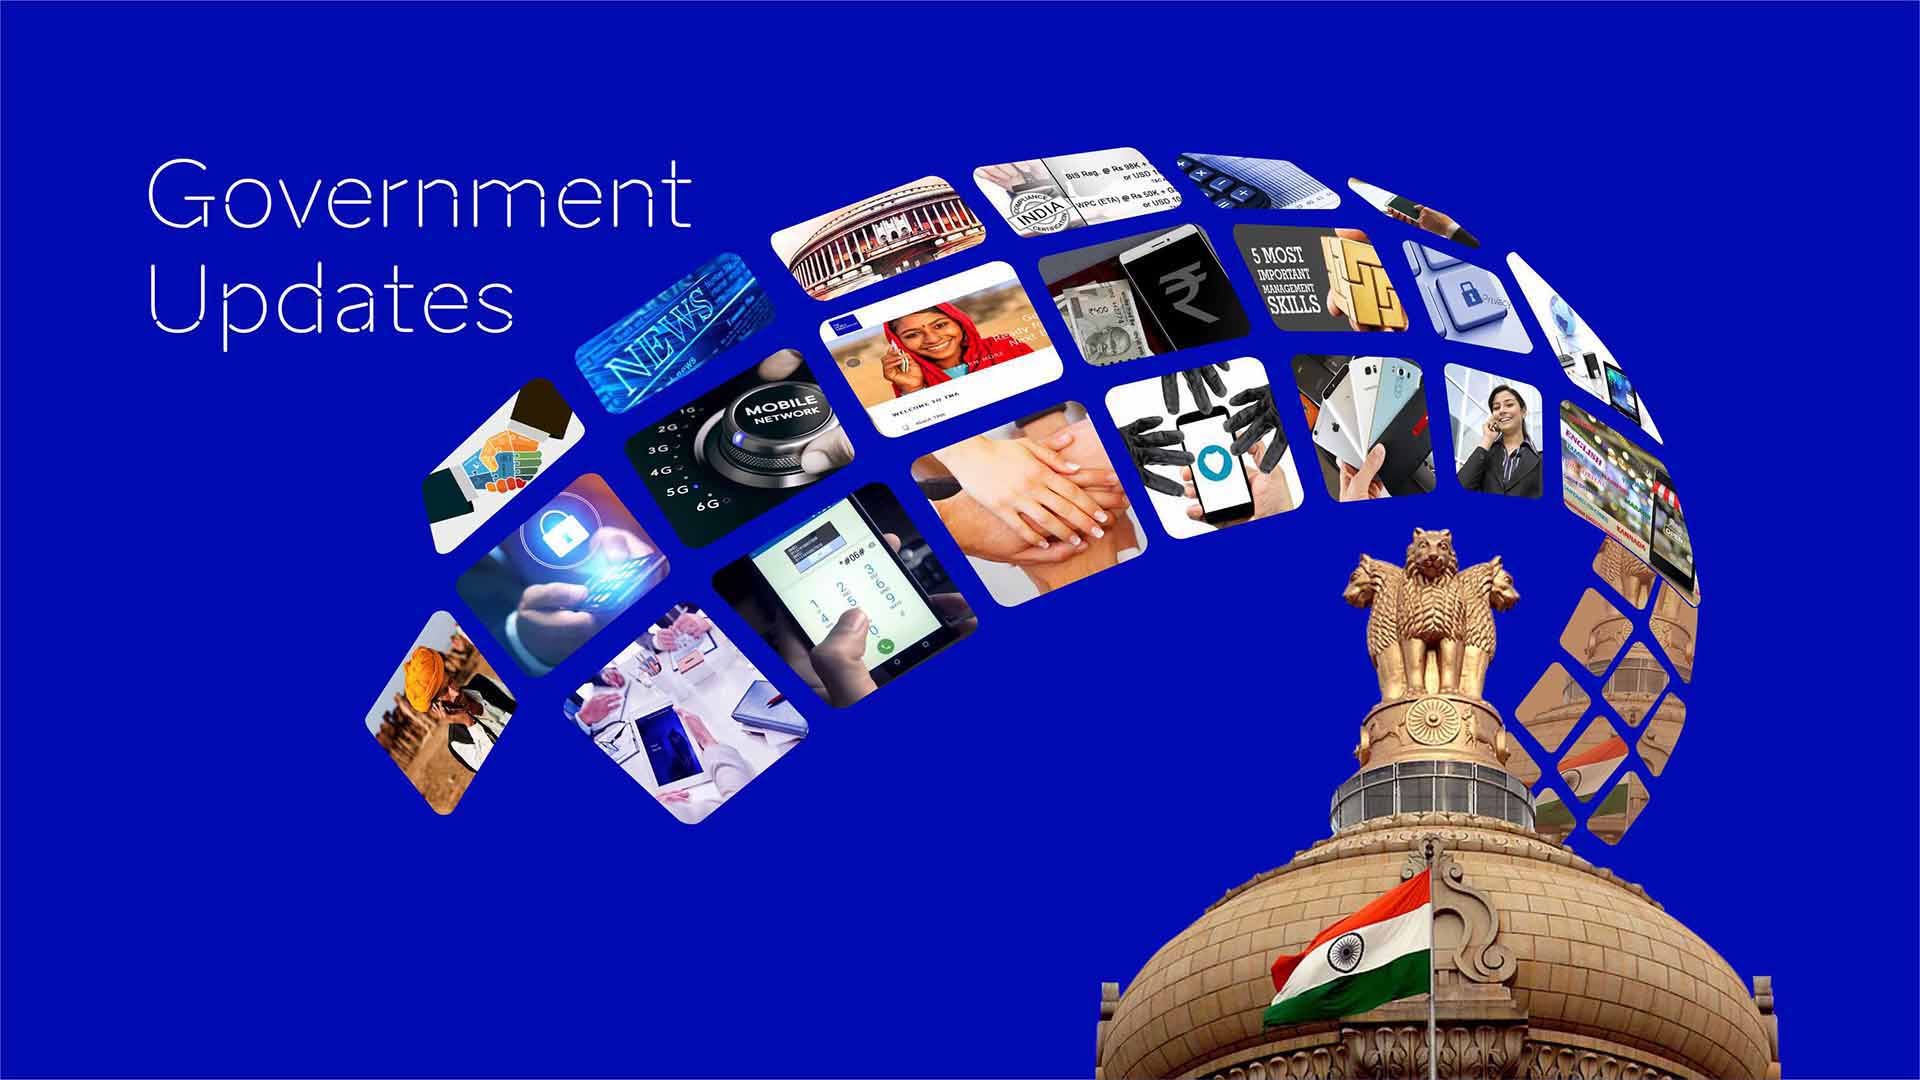 Government Updates of The Mobile Association